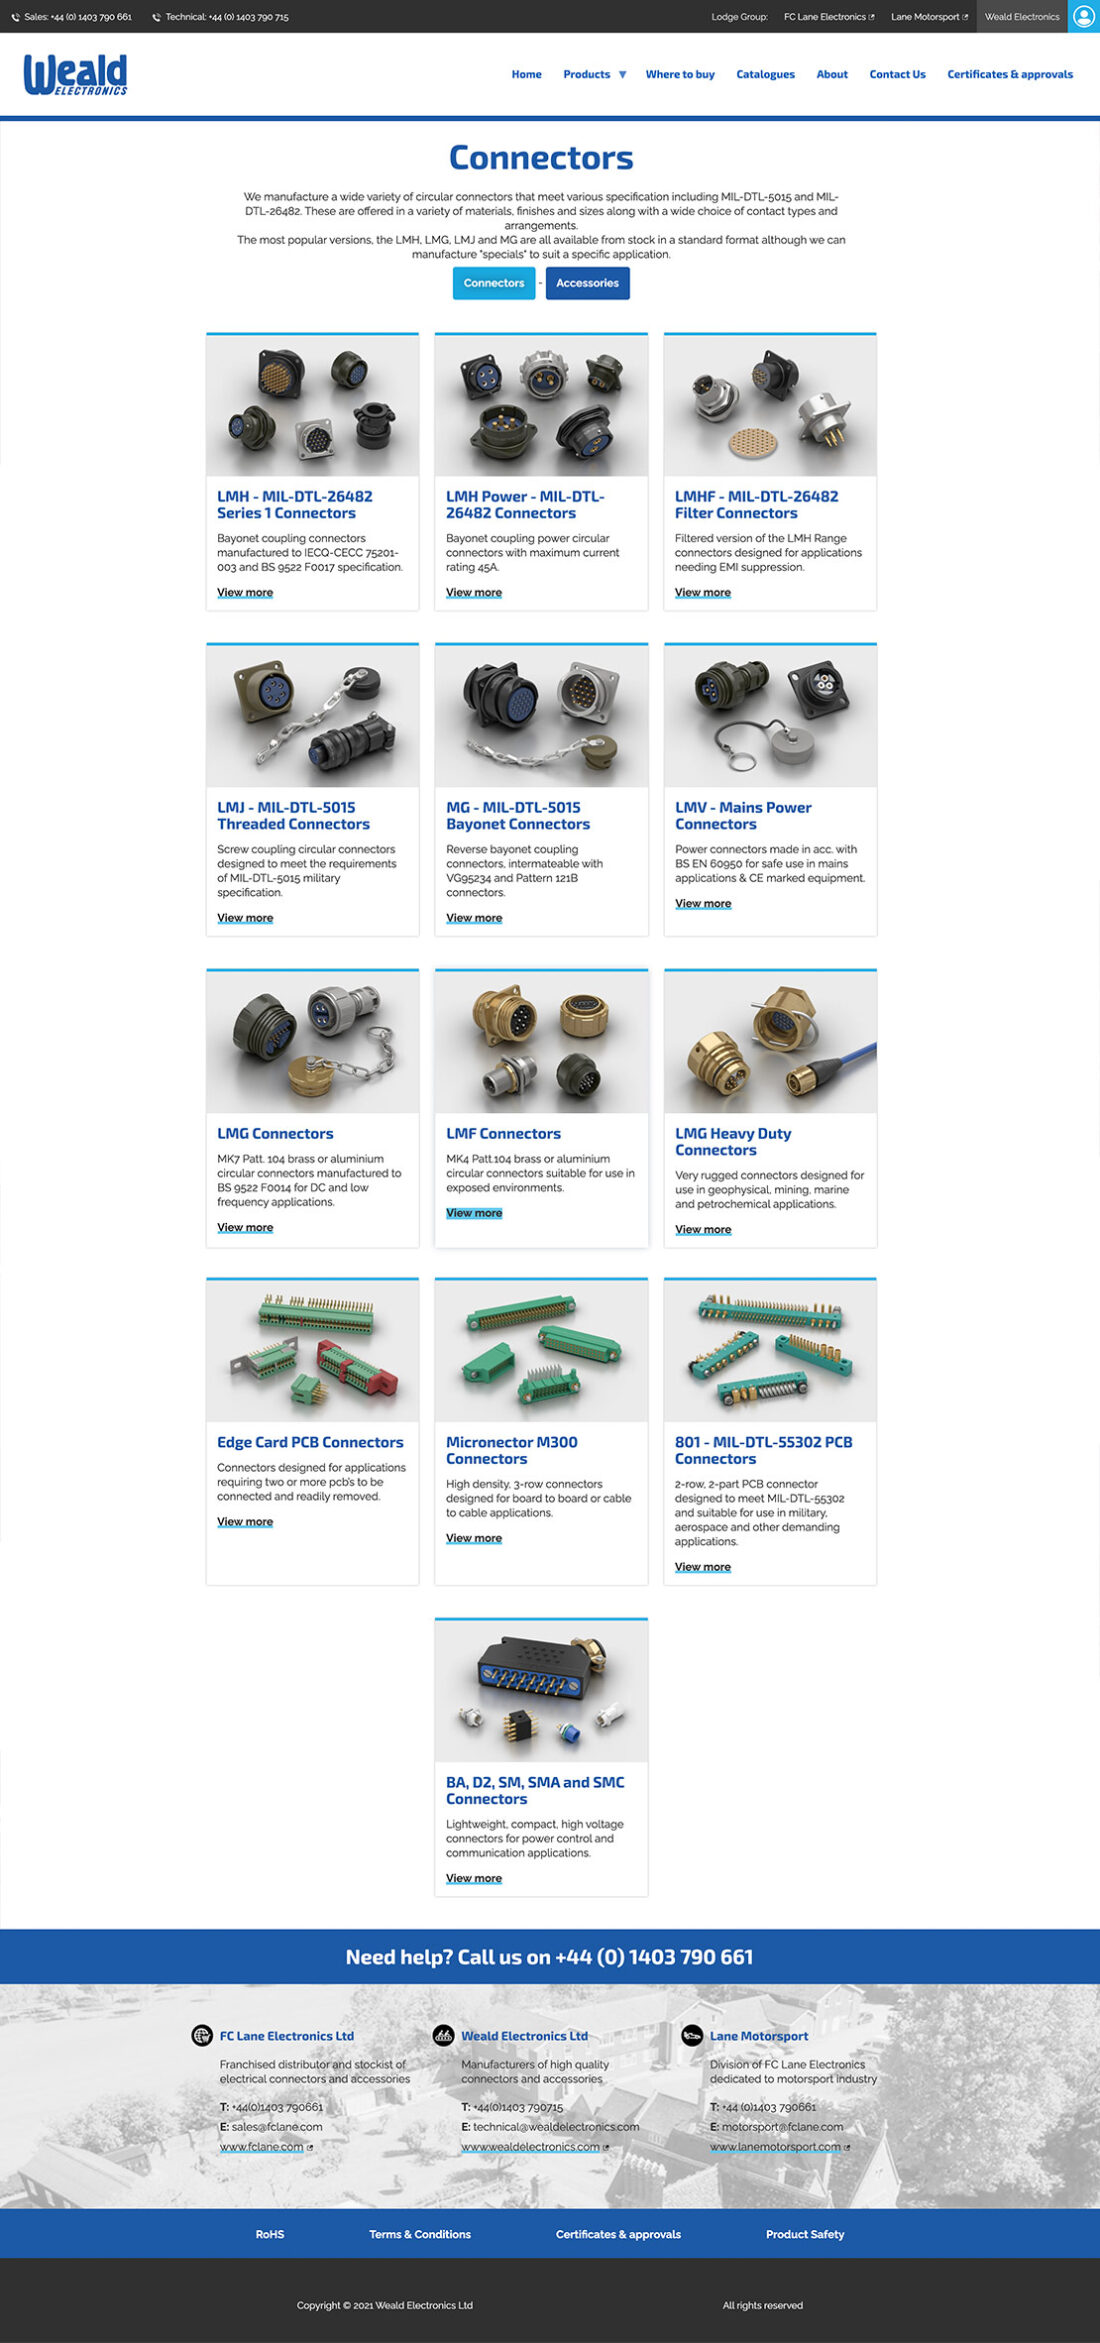 Weald Electronics Product Page visual